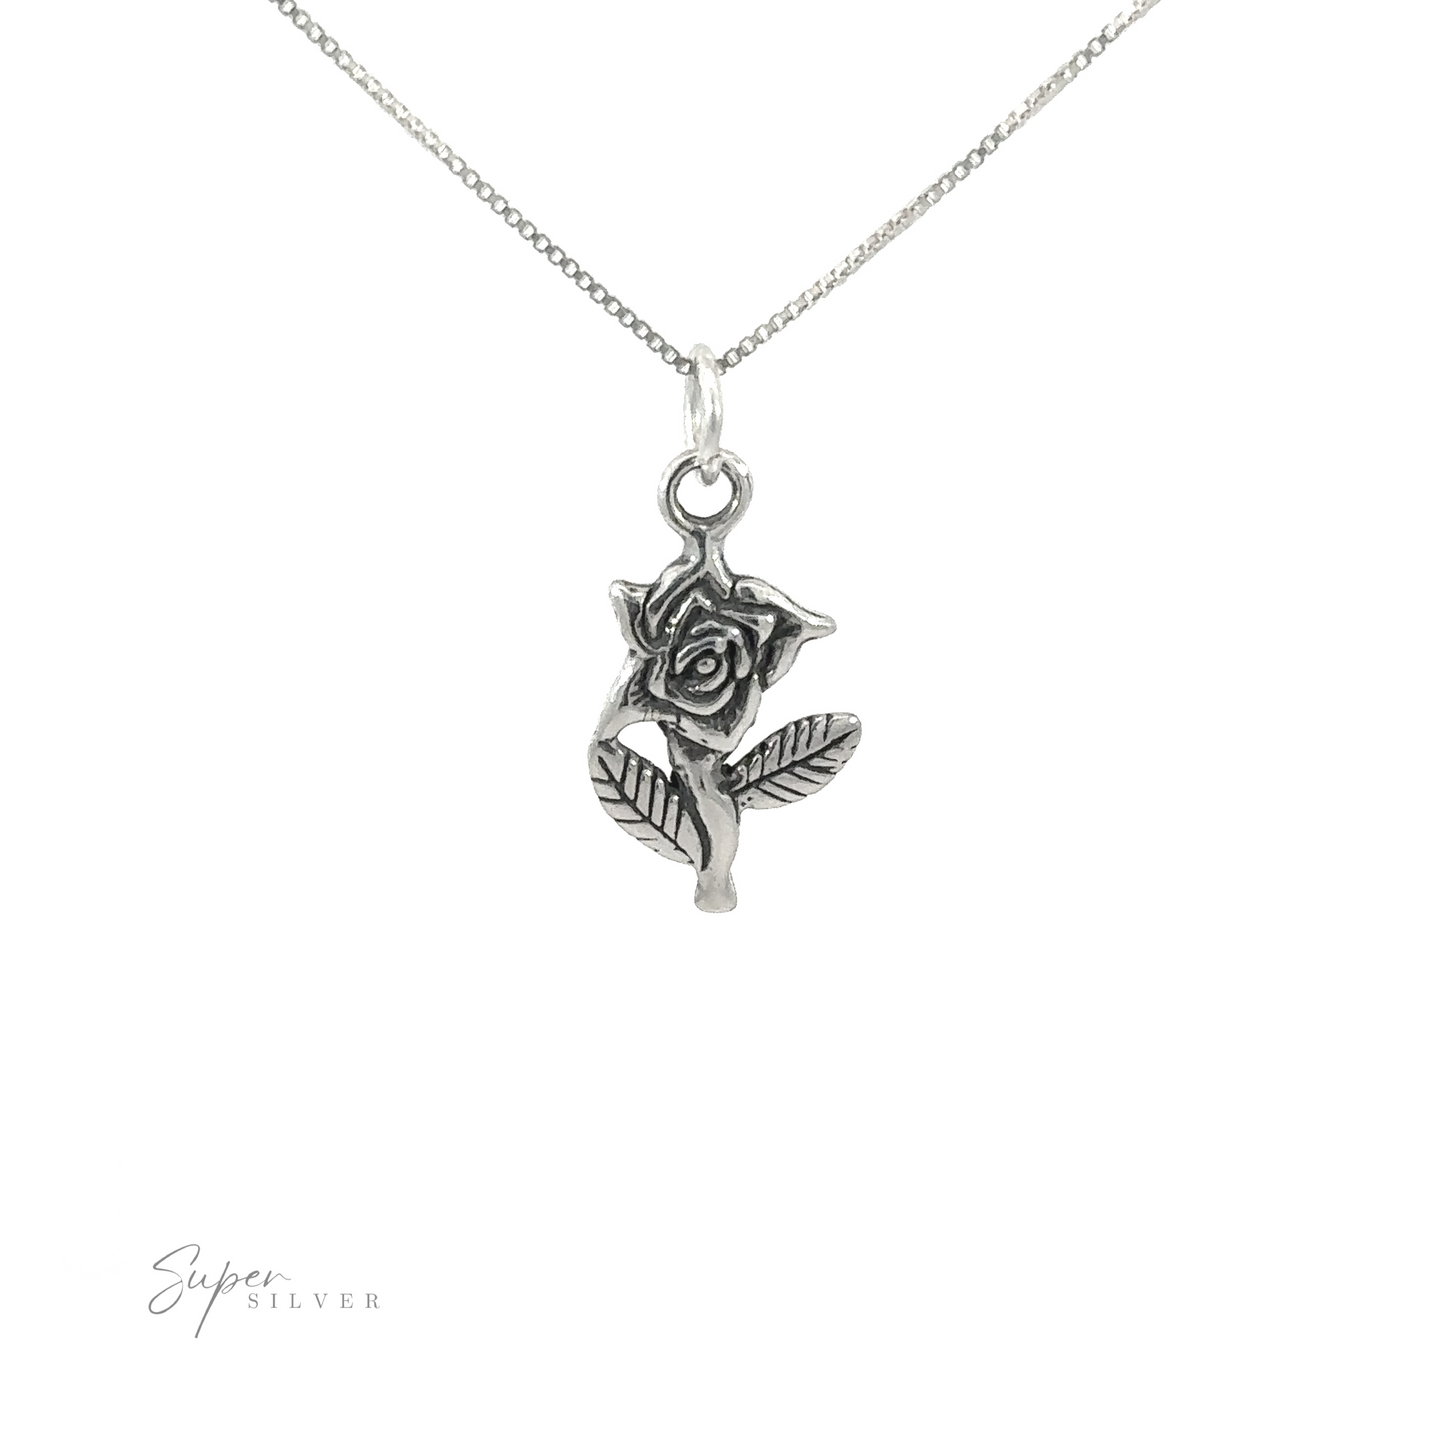 A dainty .925 Sterling Silver Rose Charm on a chain.